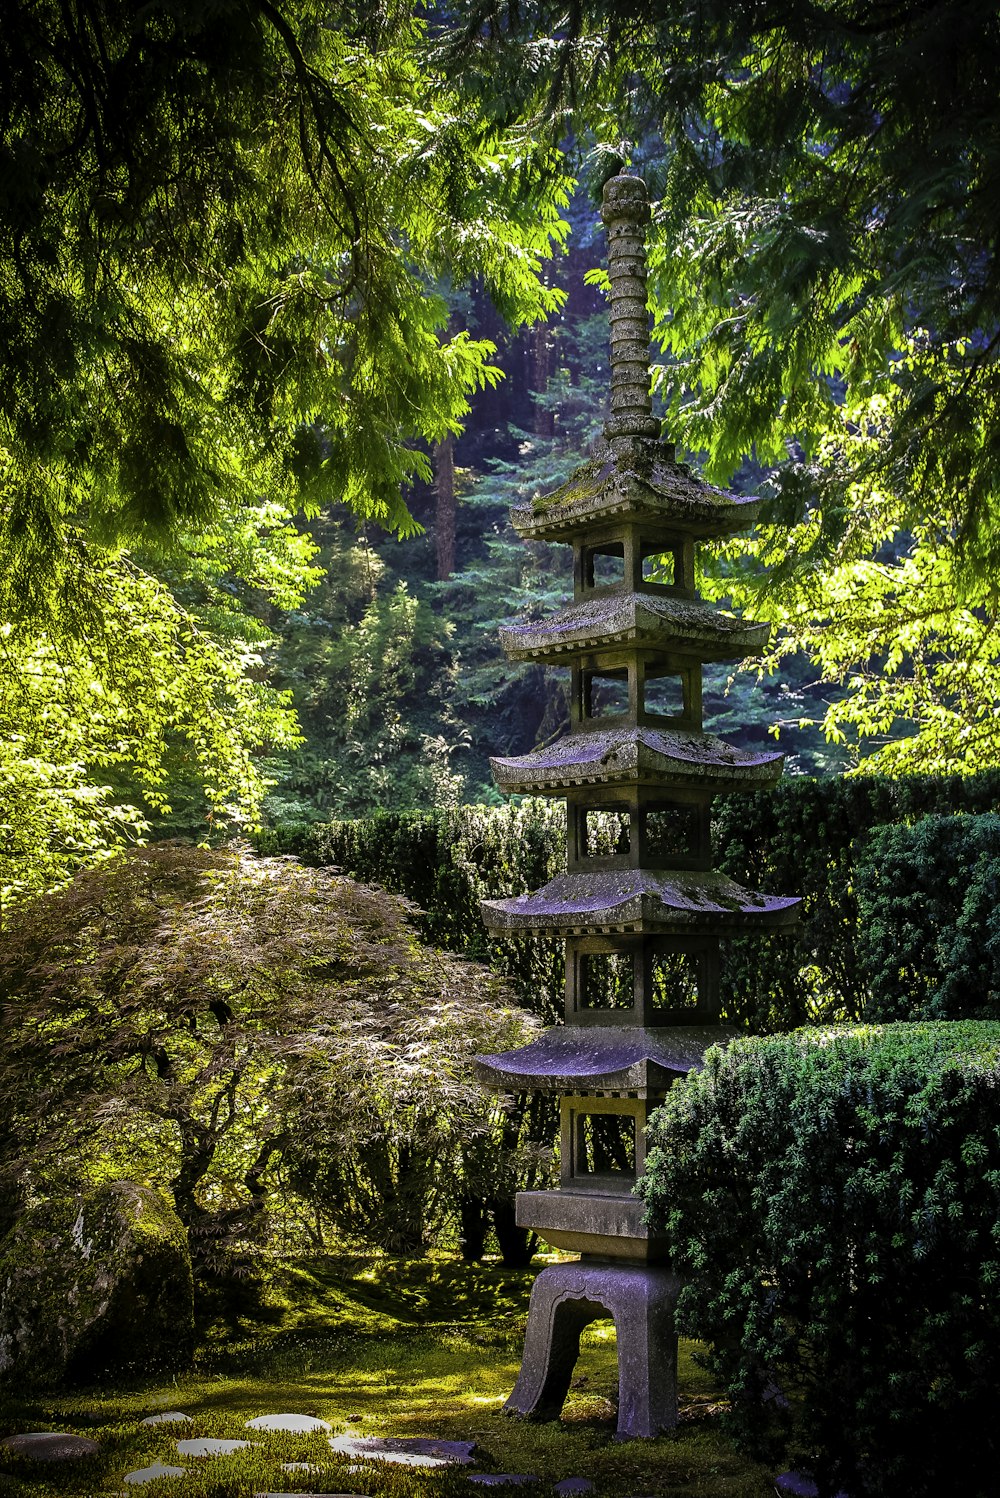 a stone pagoda in the middle of a garden